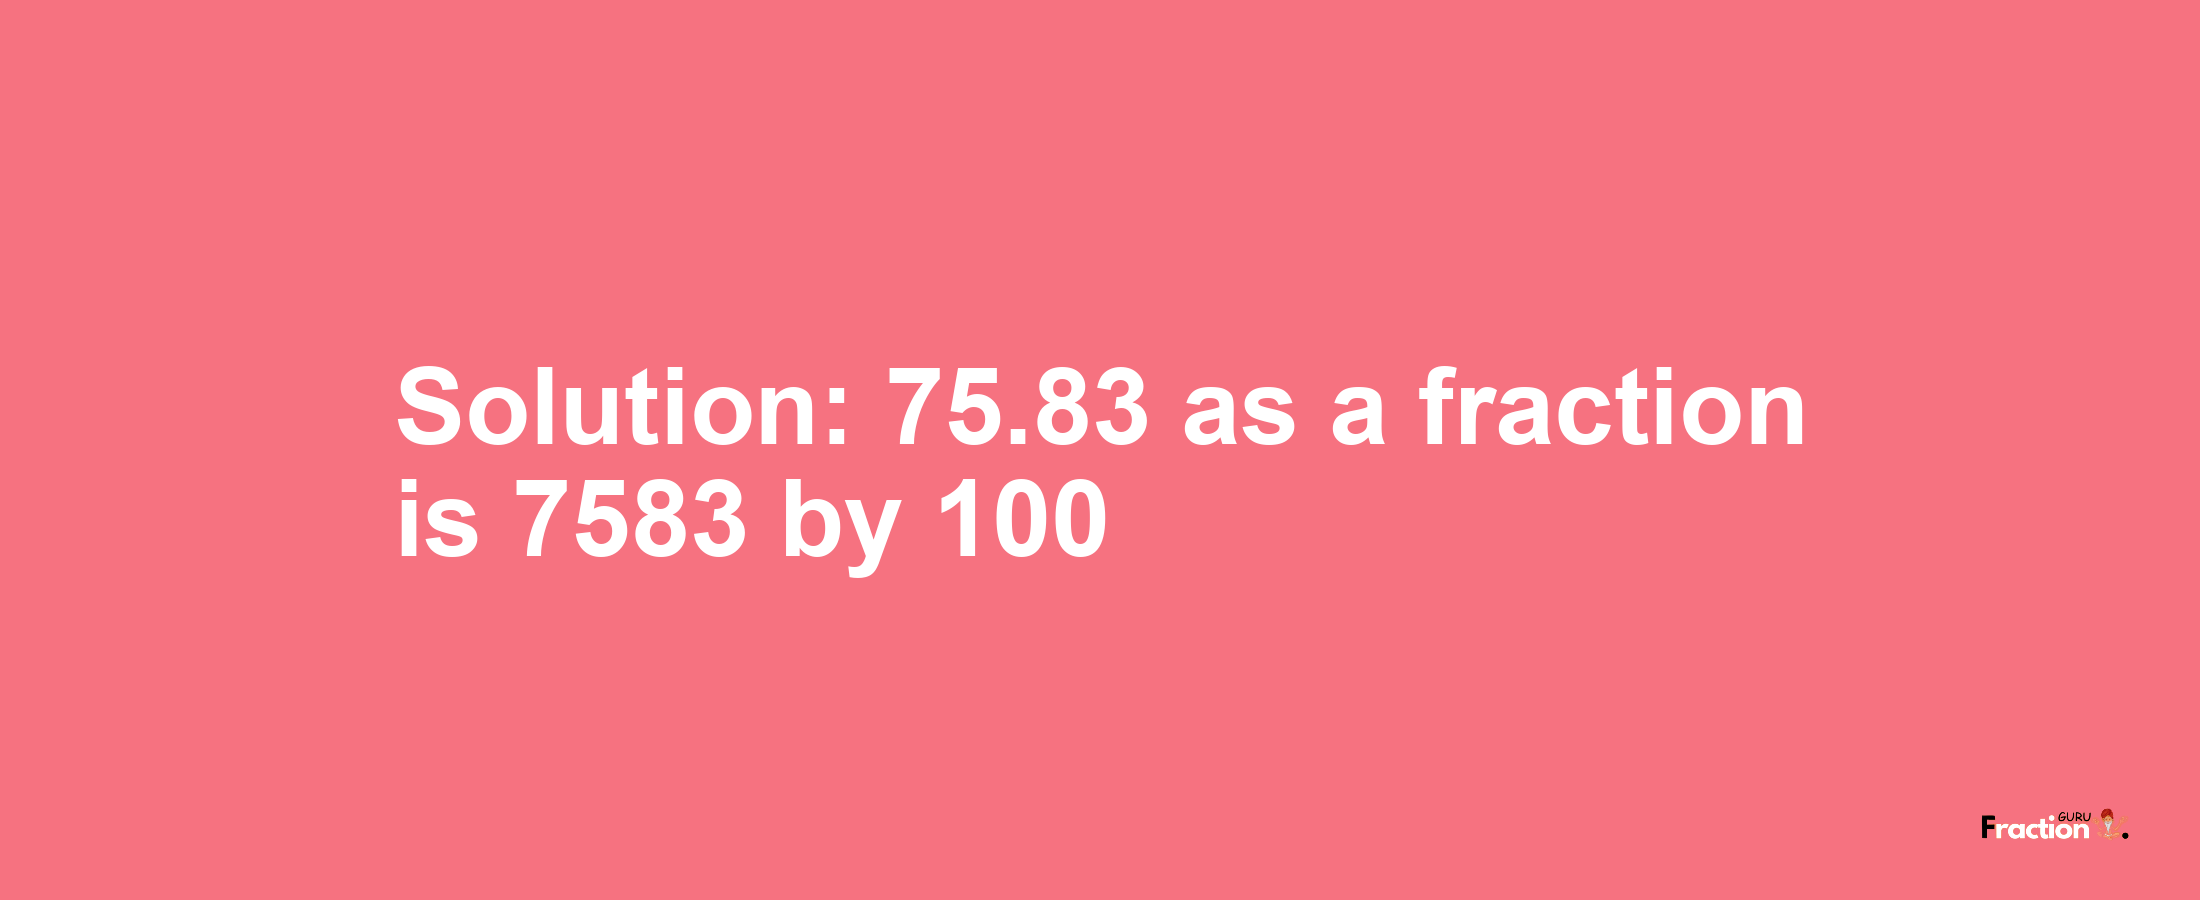 Solution:75.83 as a fraction is 7583/100